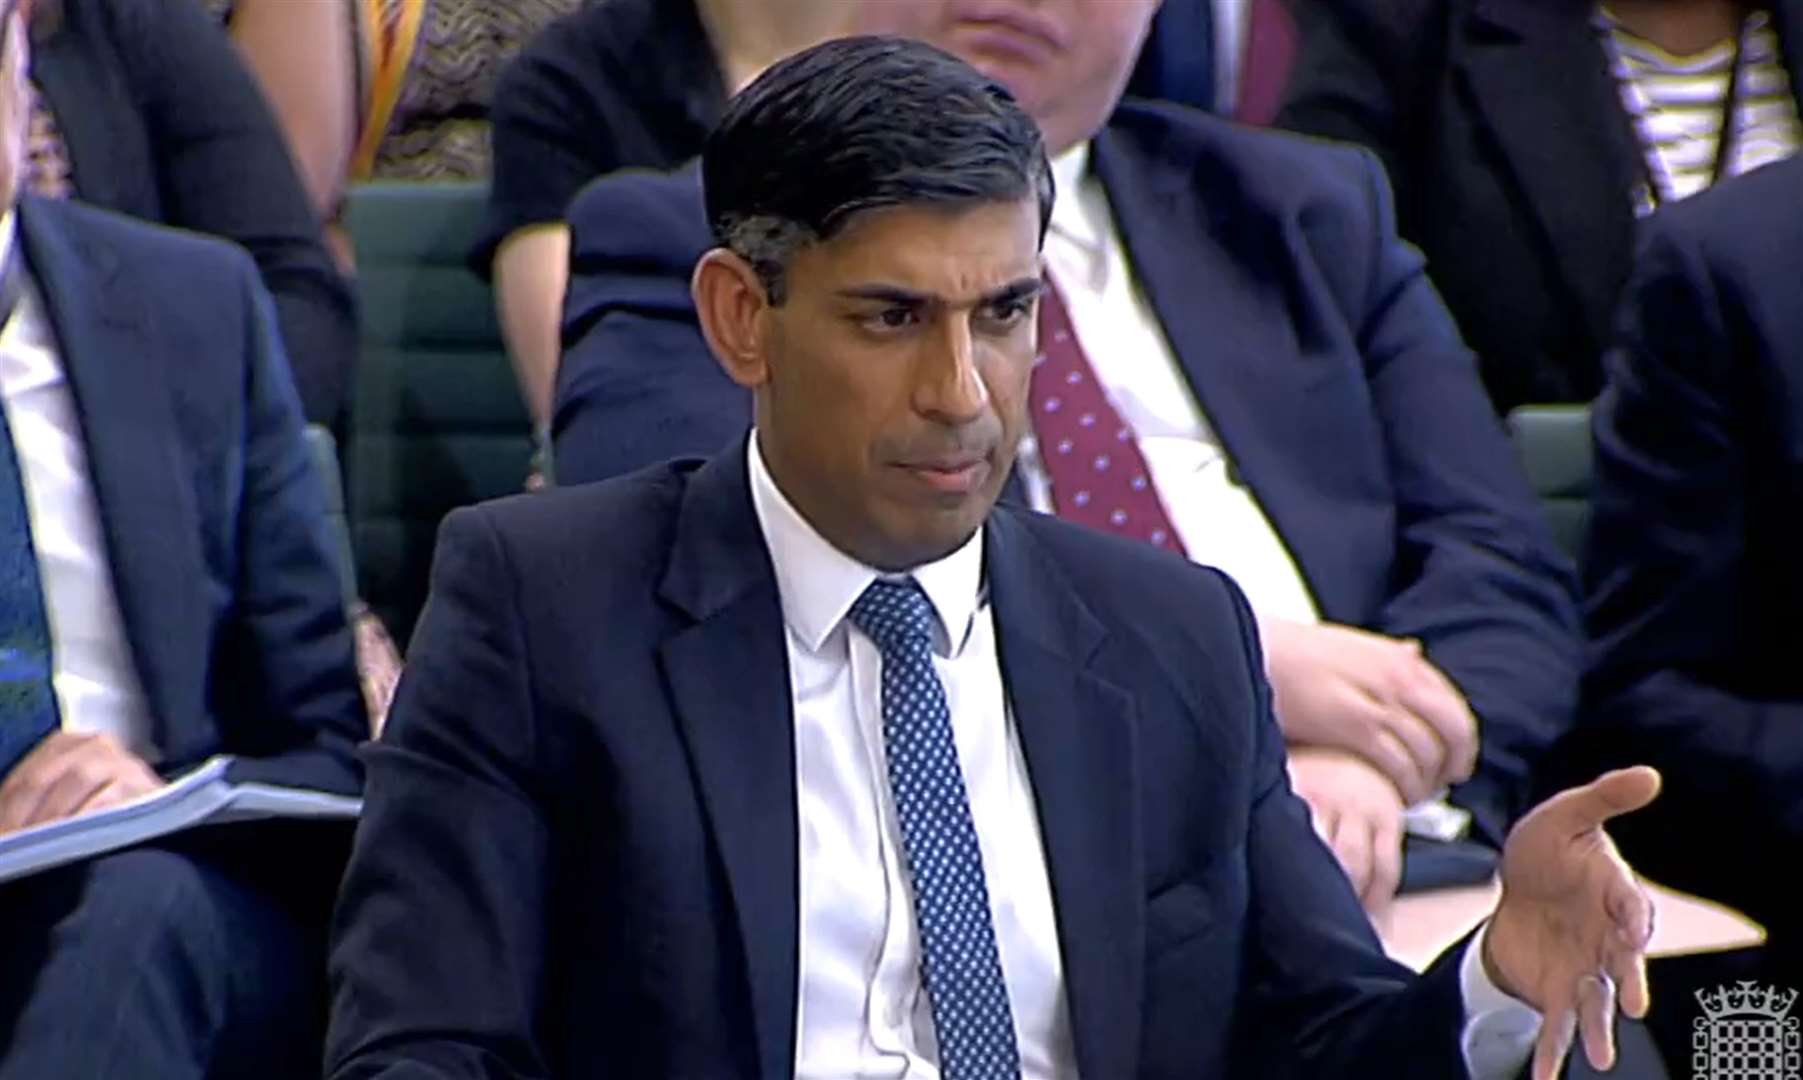 Mr Sunak appearing before the Liaison Committee at the House of Commons (House of Commons/PA)